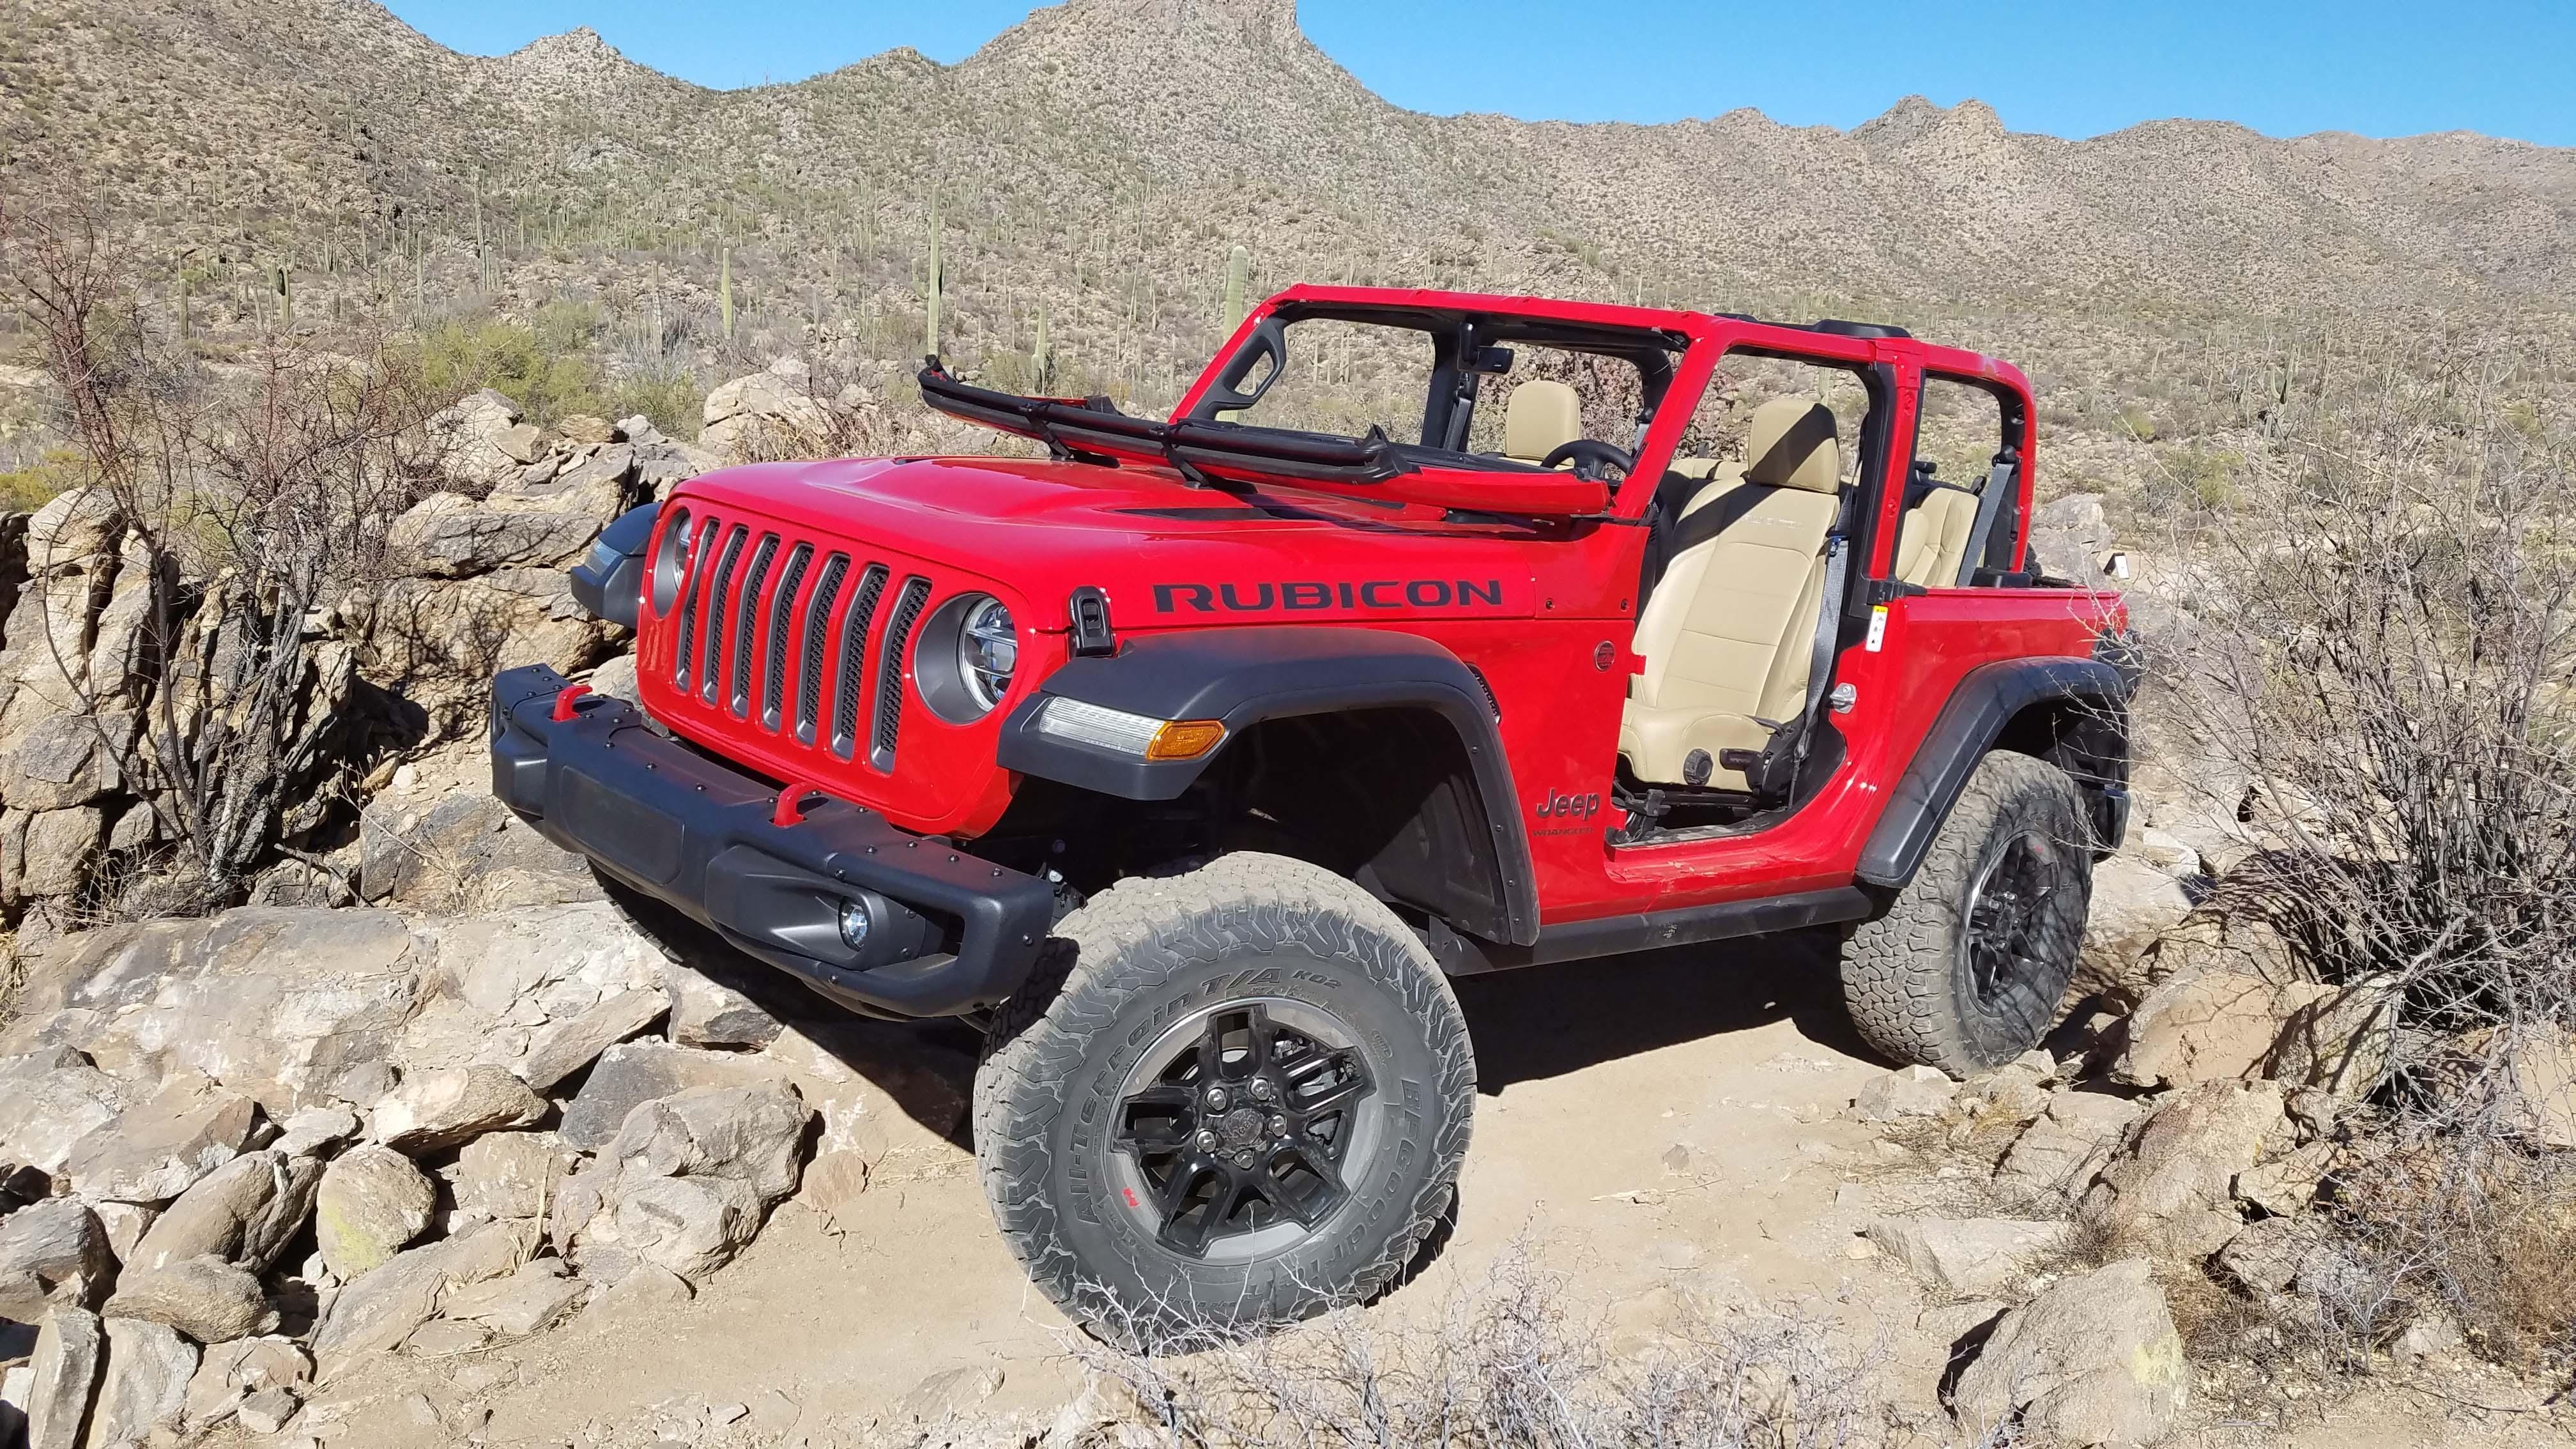 Jeep Wrangler: Detroit News Vehicle of the Year